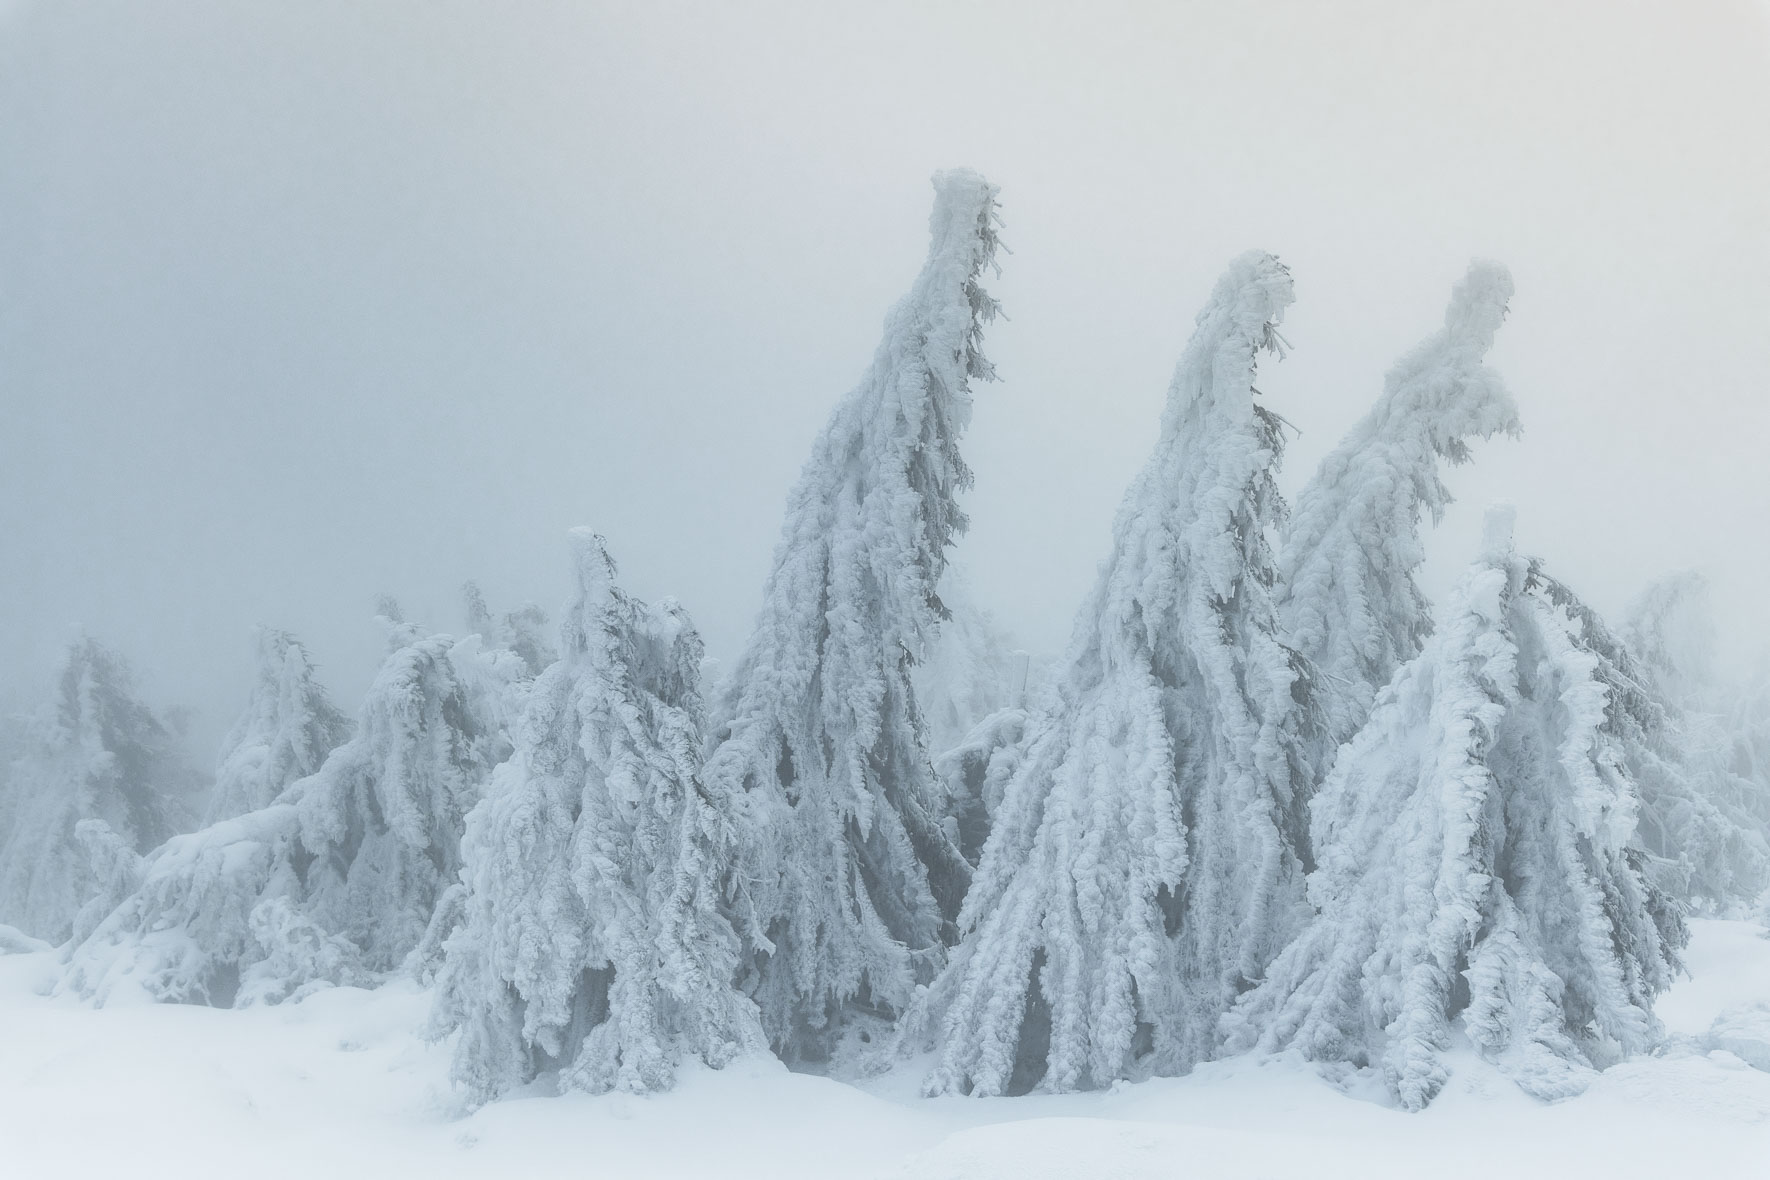 Snow covered group of trees on the summit of Mount Brocken in the Harz Mountains